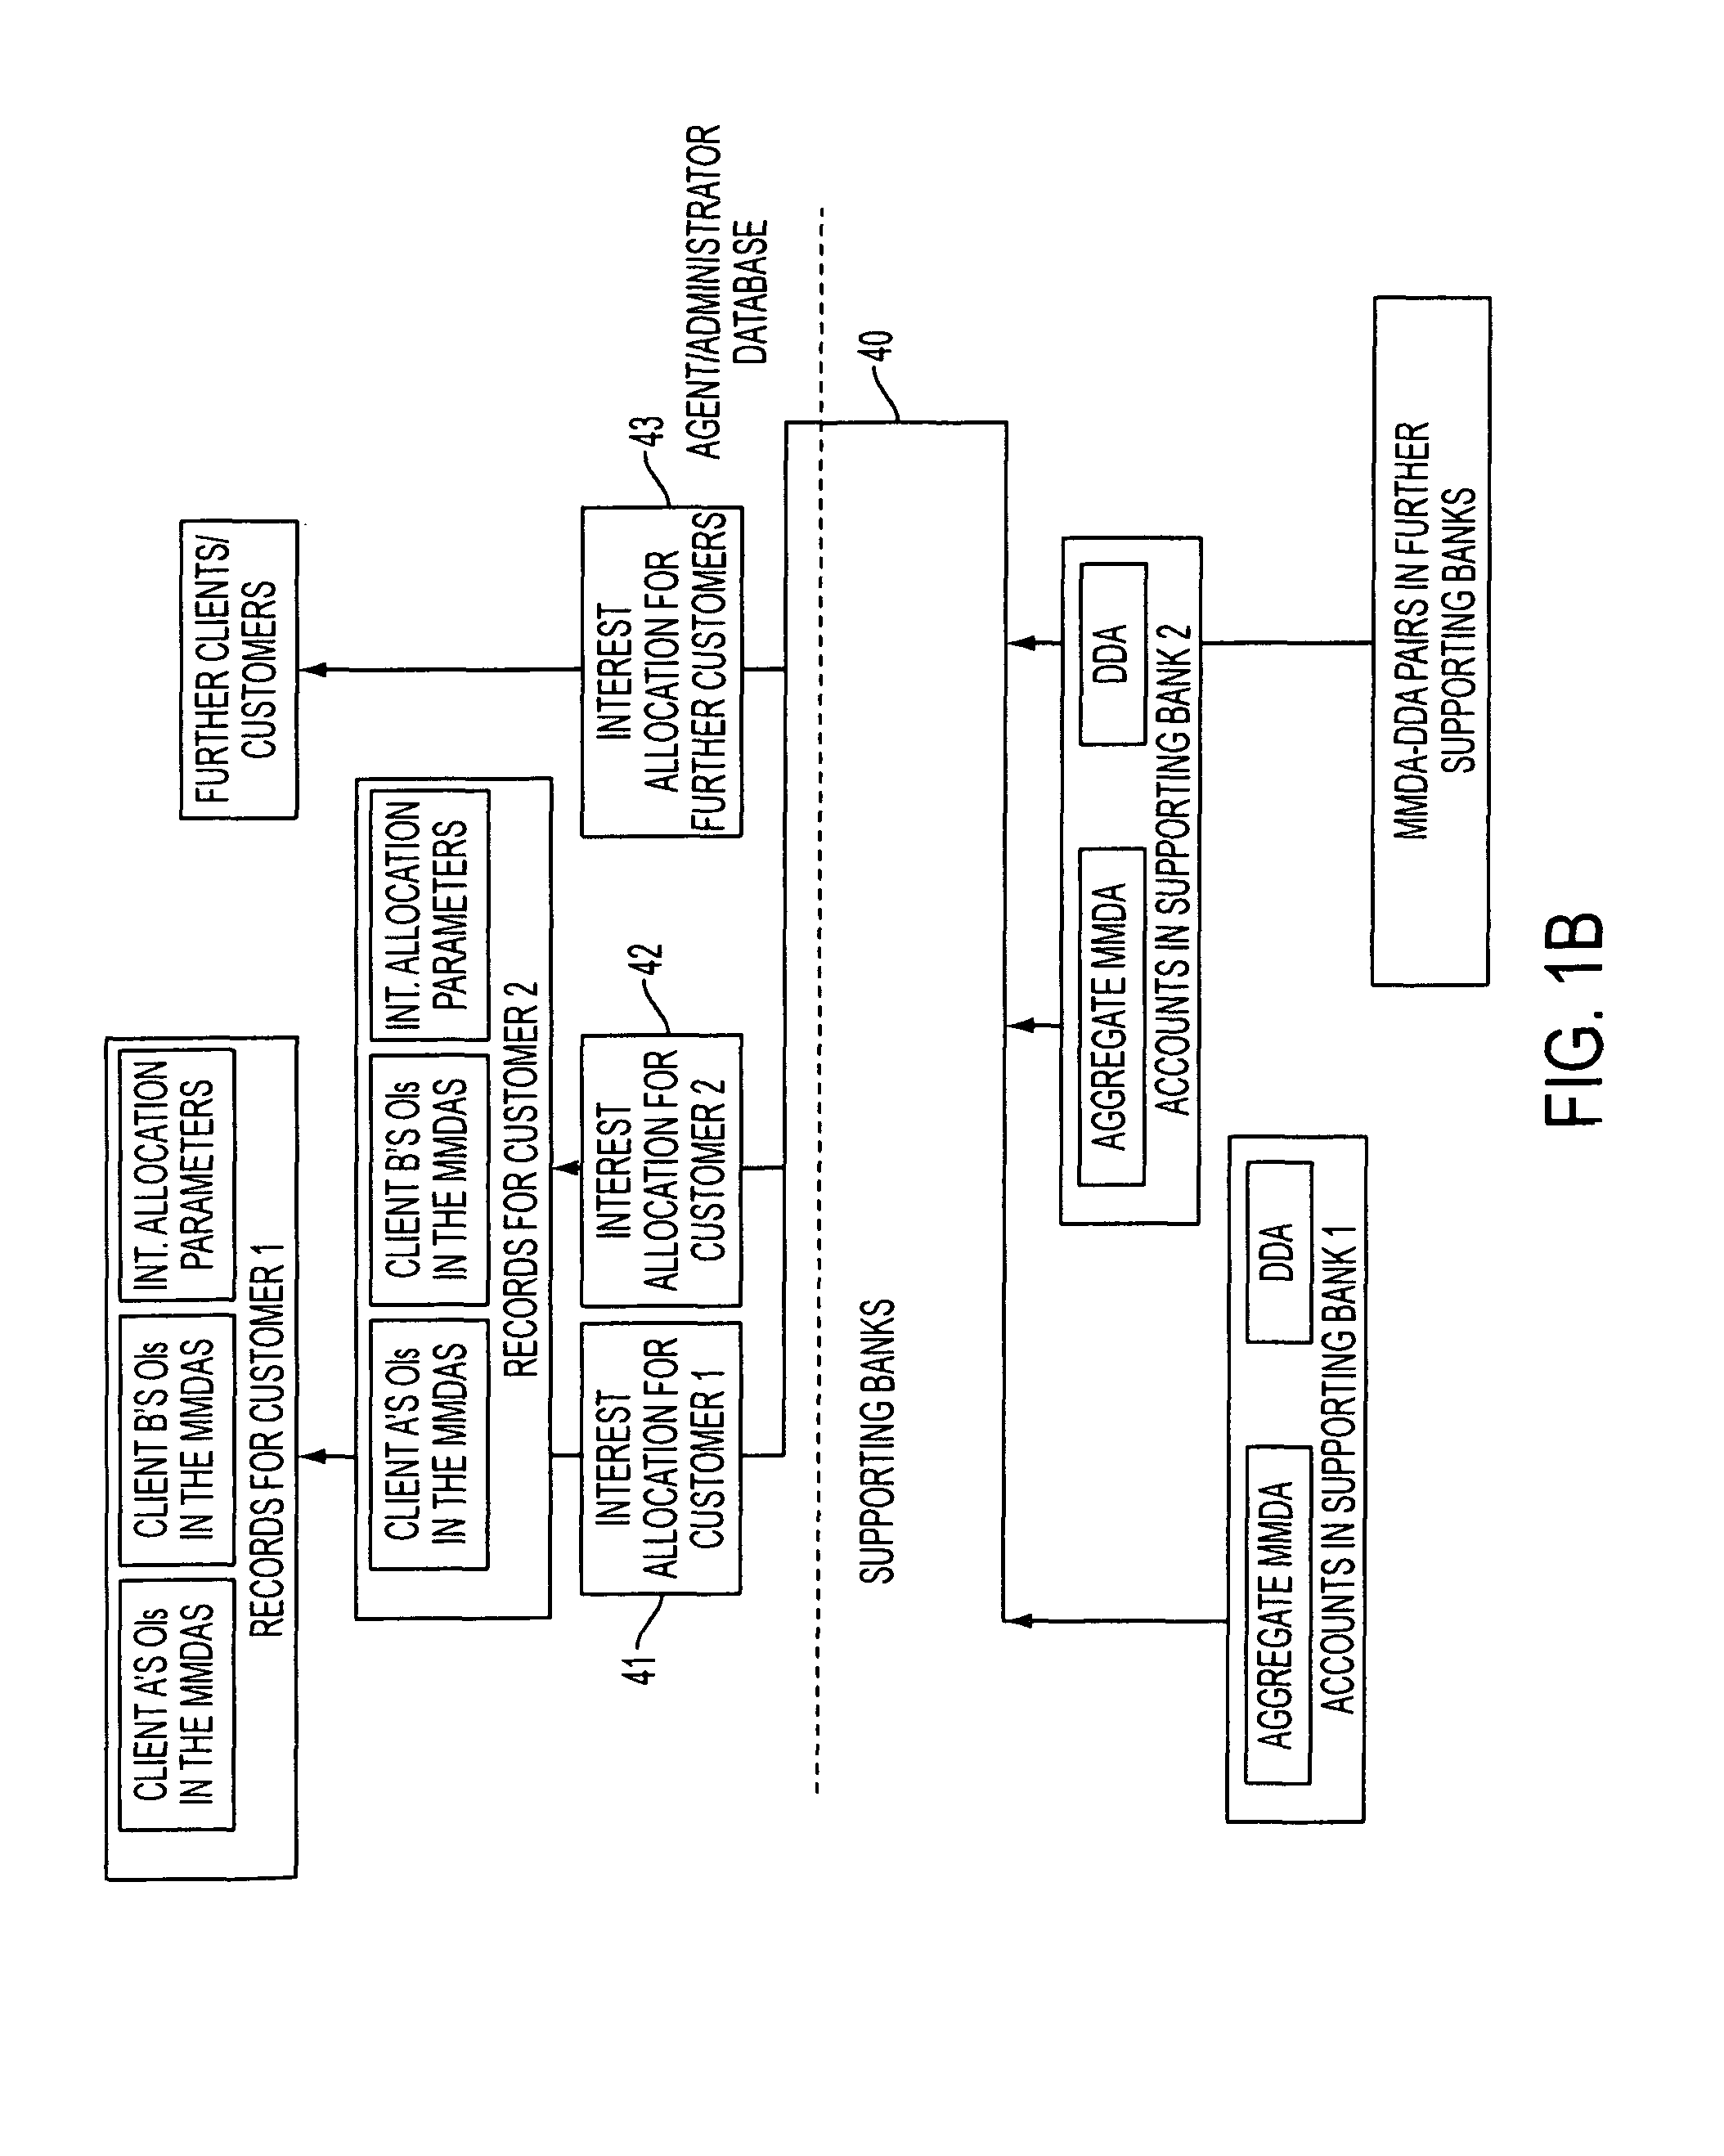 Systems and methods for money fund banking with flexible interest allocation